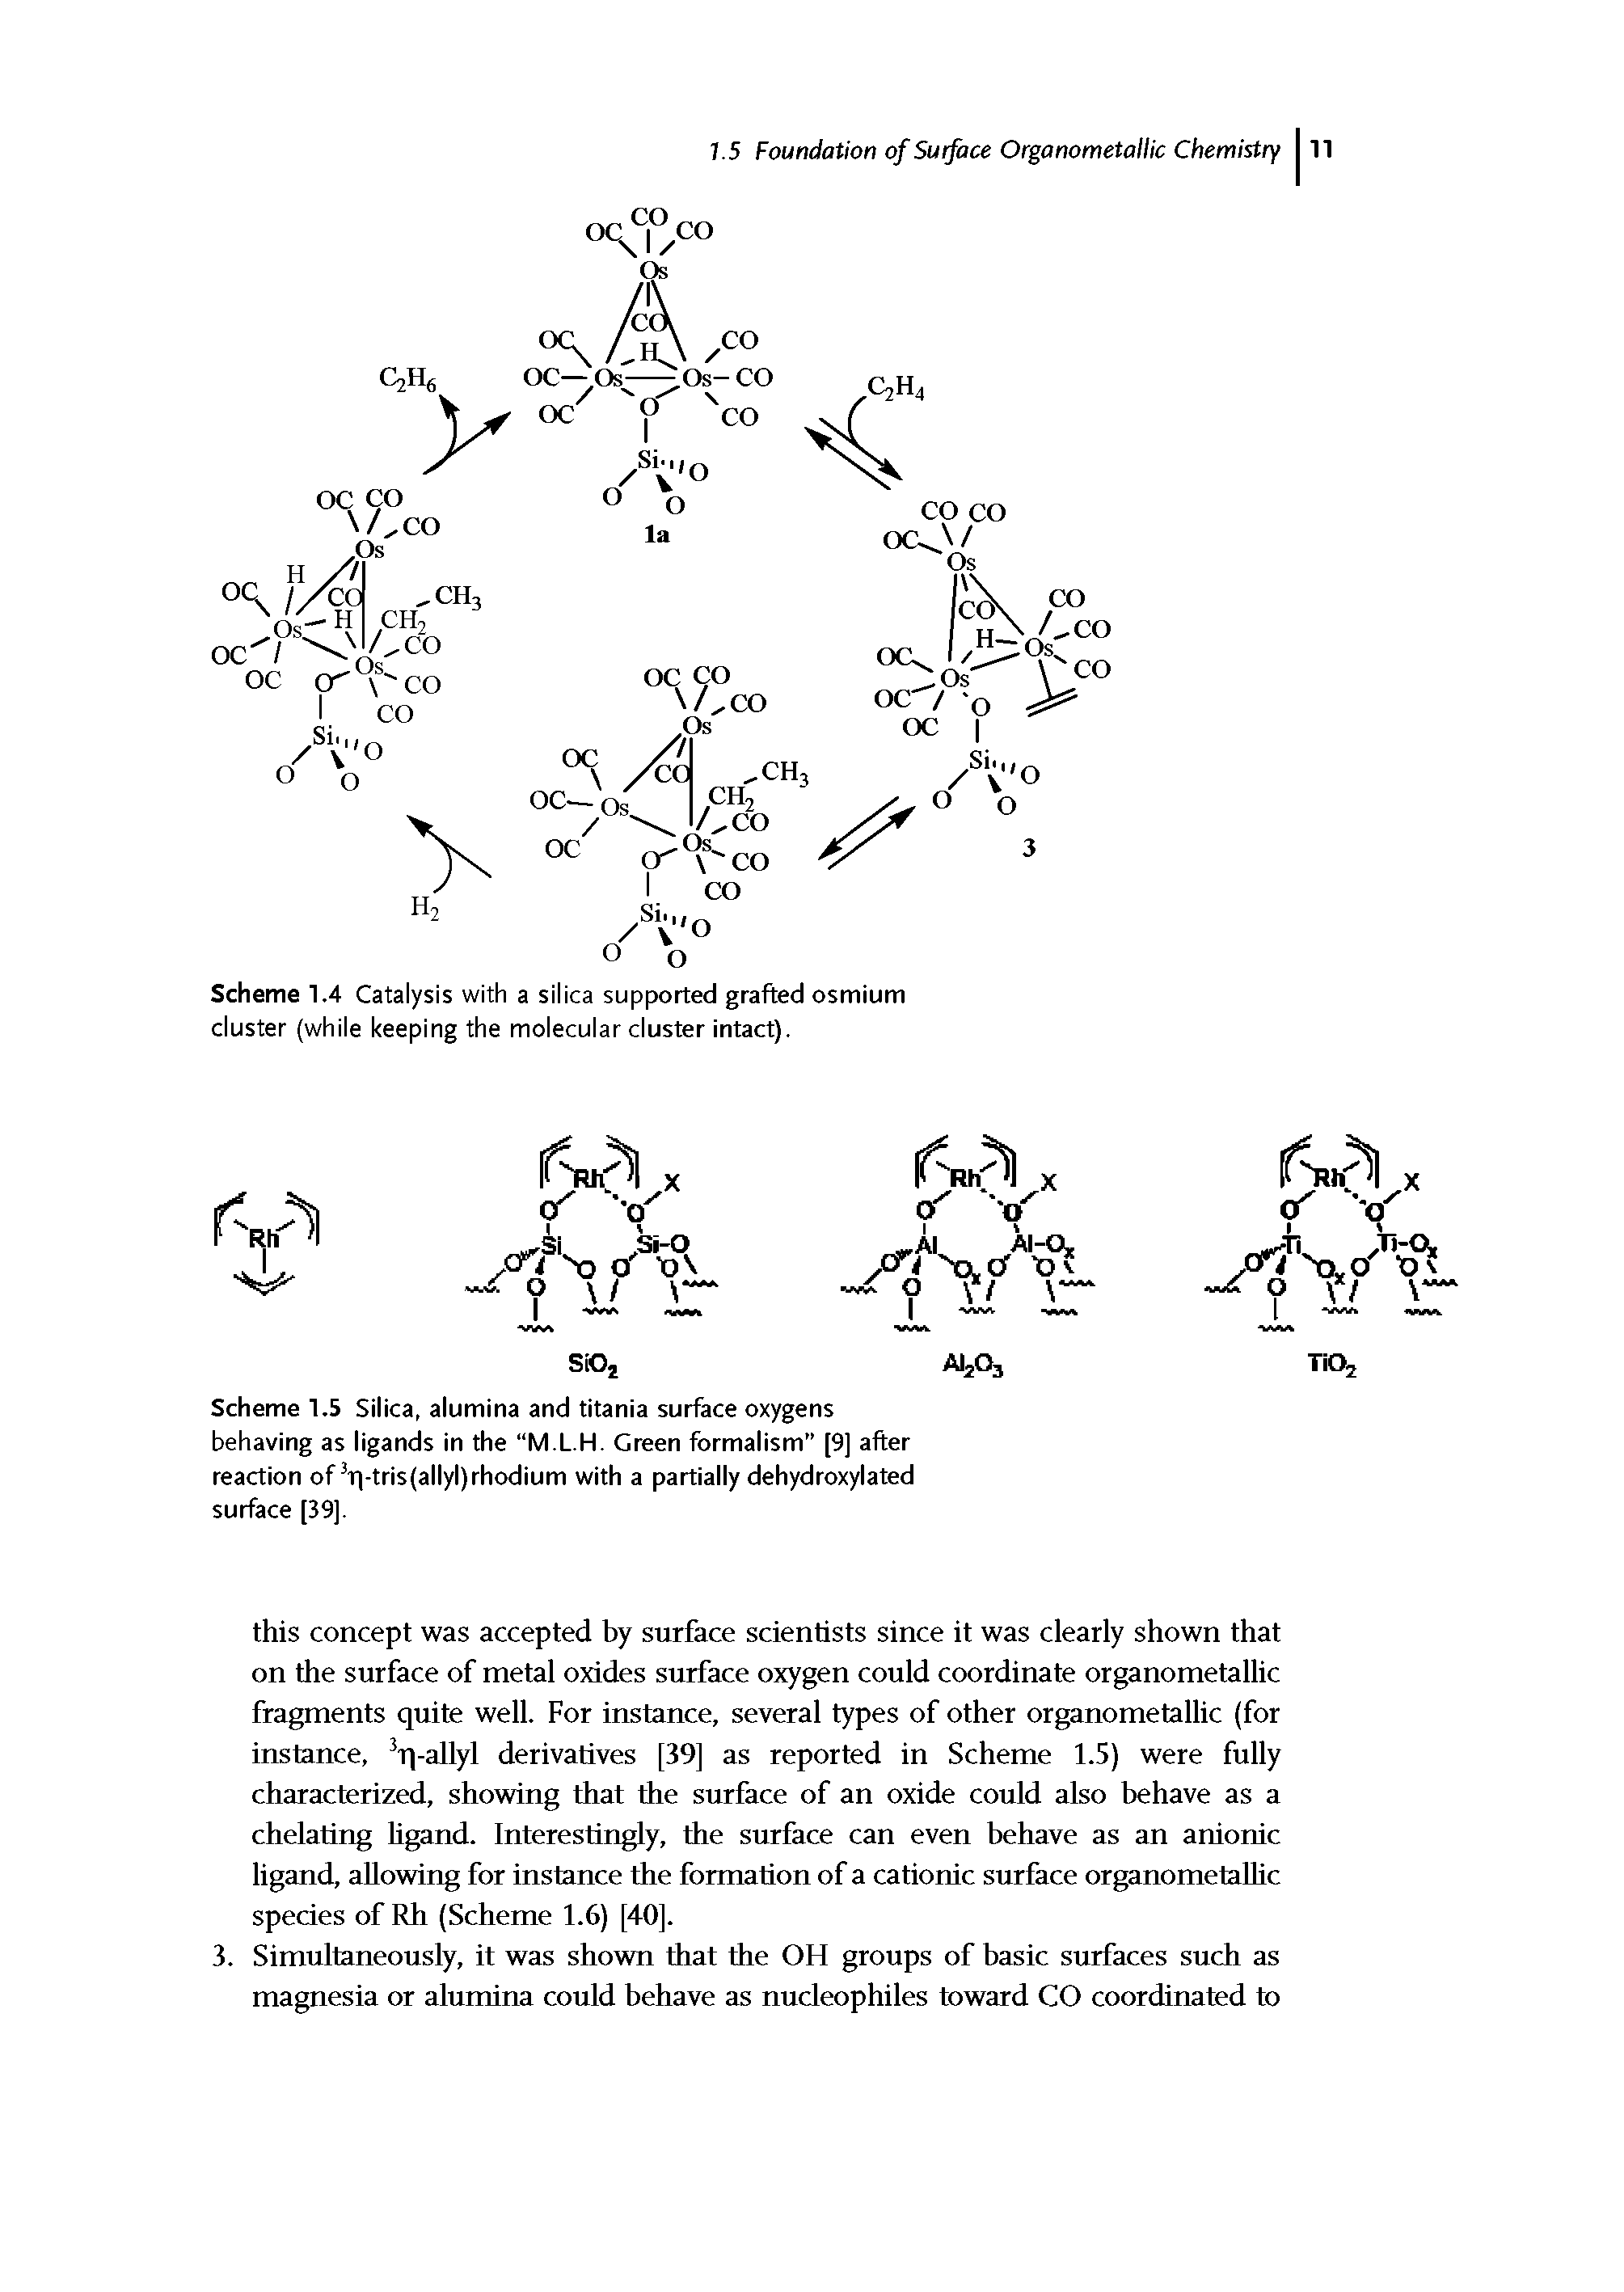 Scheme 1.5 Silica, alumina and titania surface oxygens behaving as ligands in the M.L.H. Green formalism [9] after reaction of r -tris(allyl)rhodium with a partially dehydroxylated surface [39].